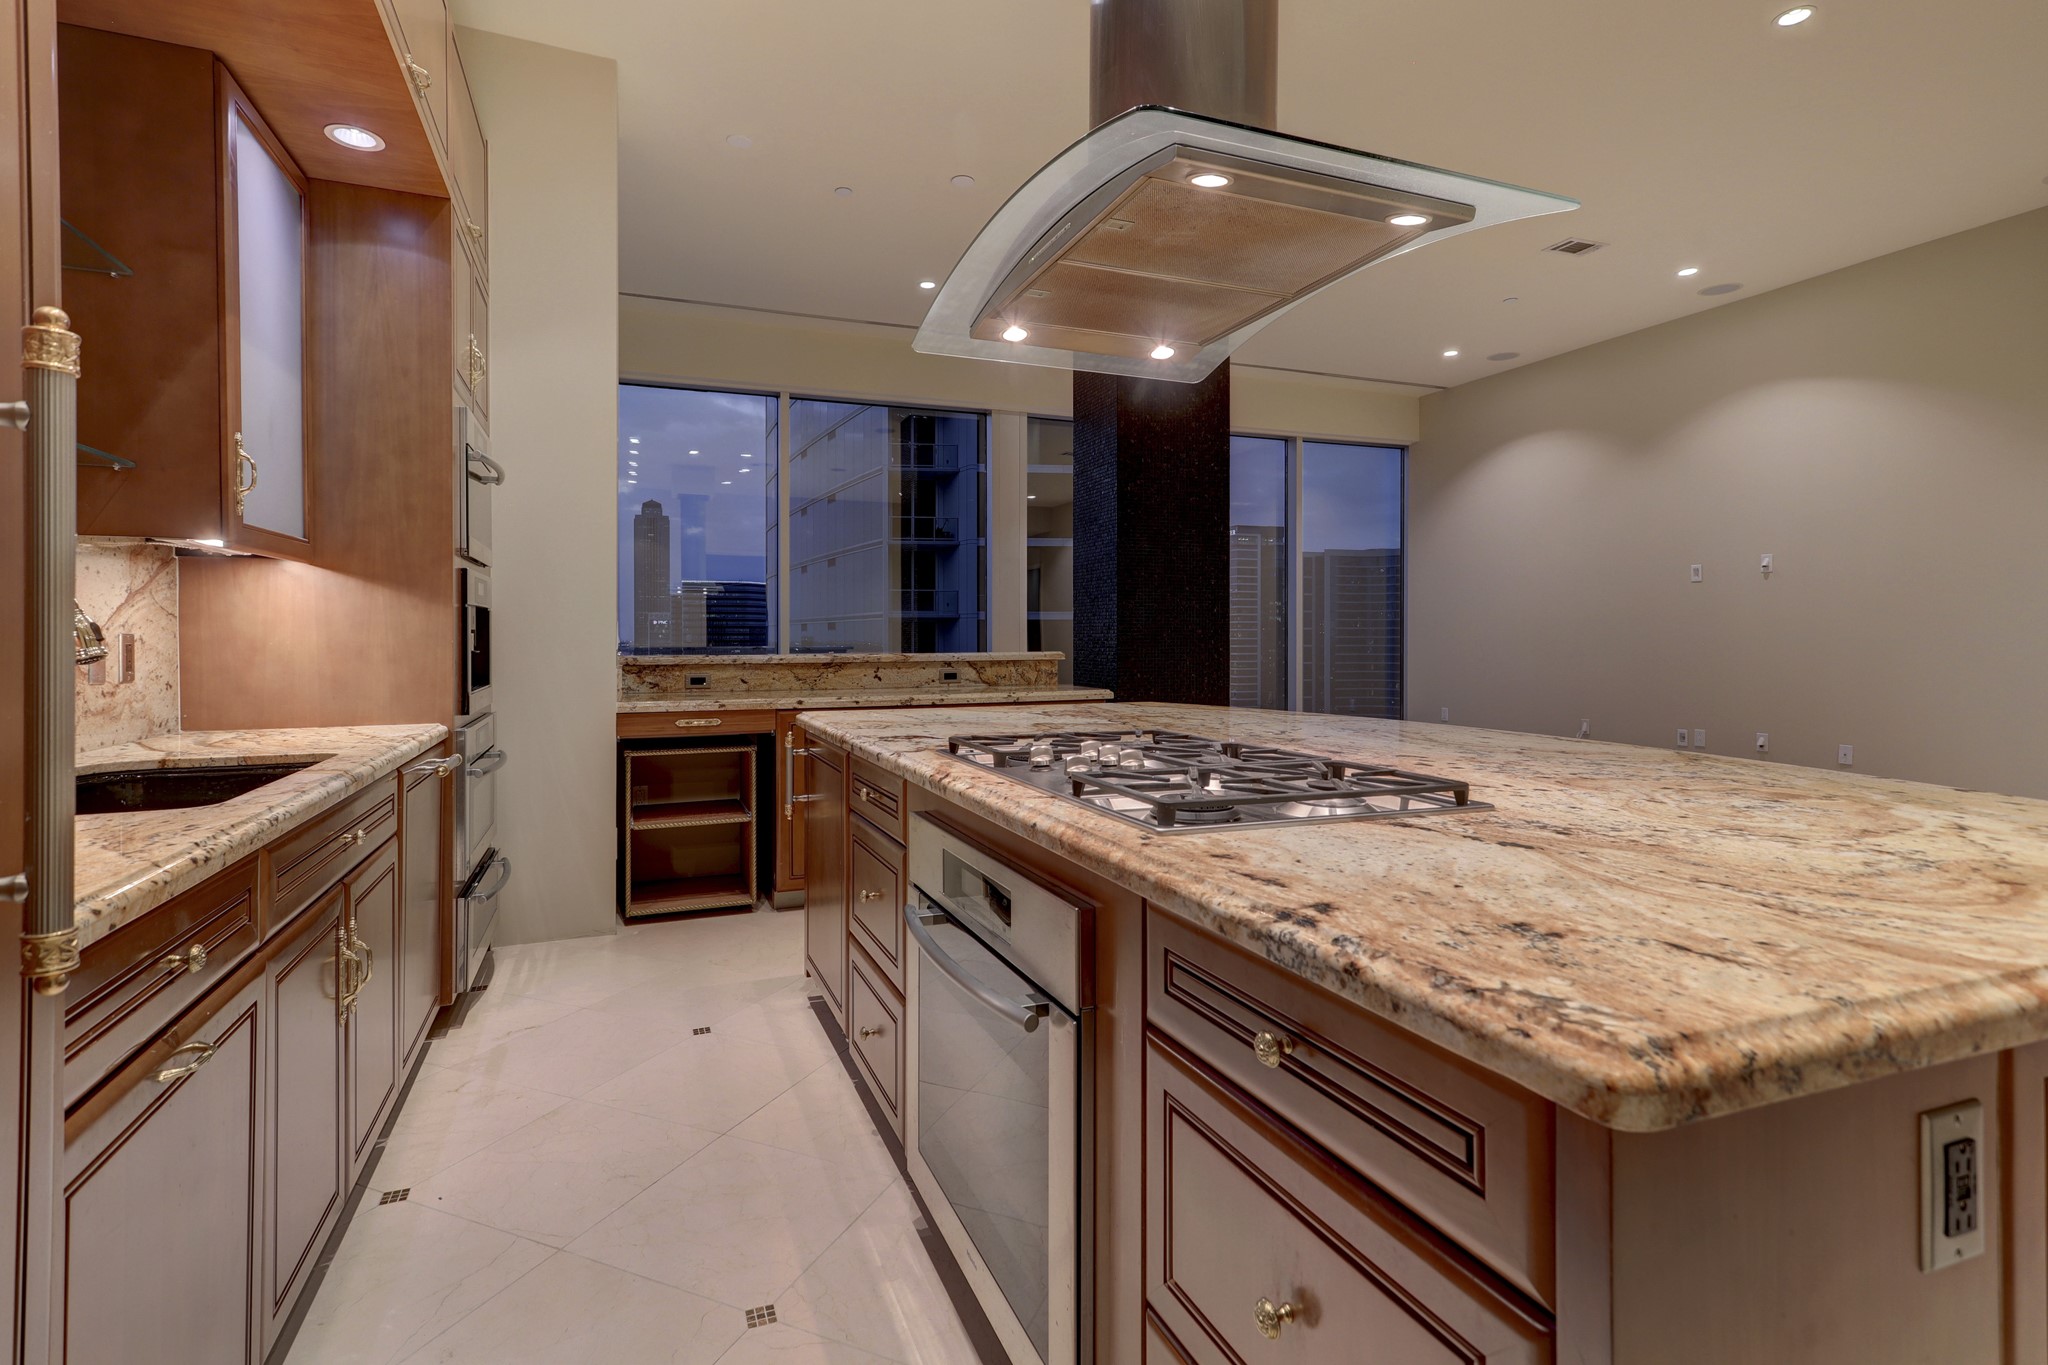 The Kitchen offers ample storage cabinets and drawers, prep space and under counter refrigerator.